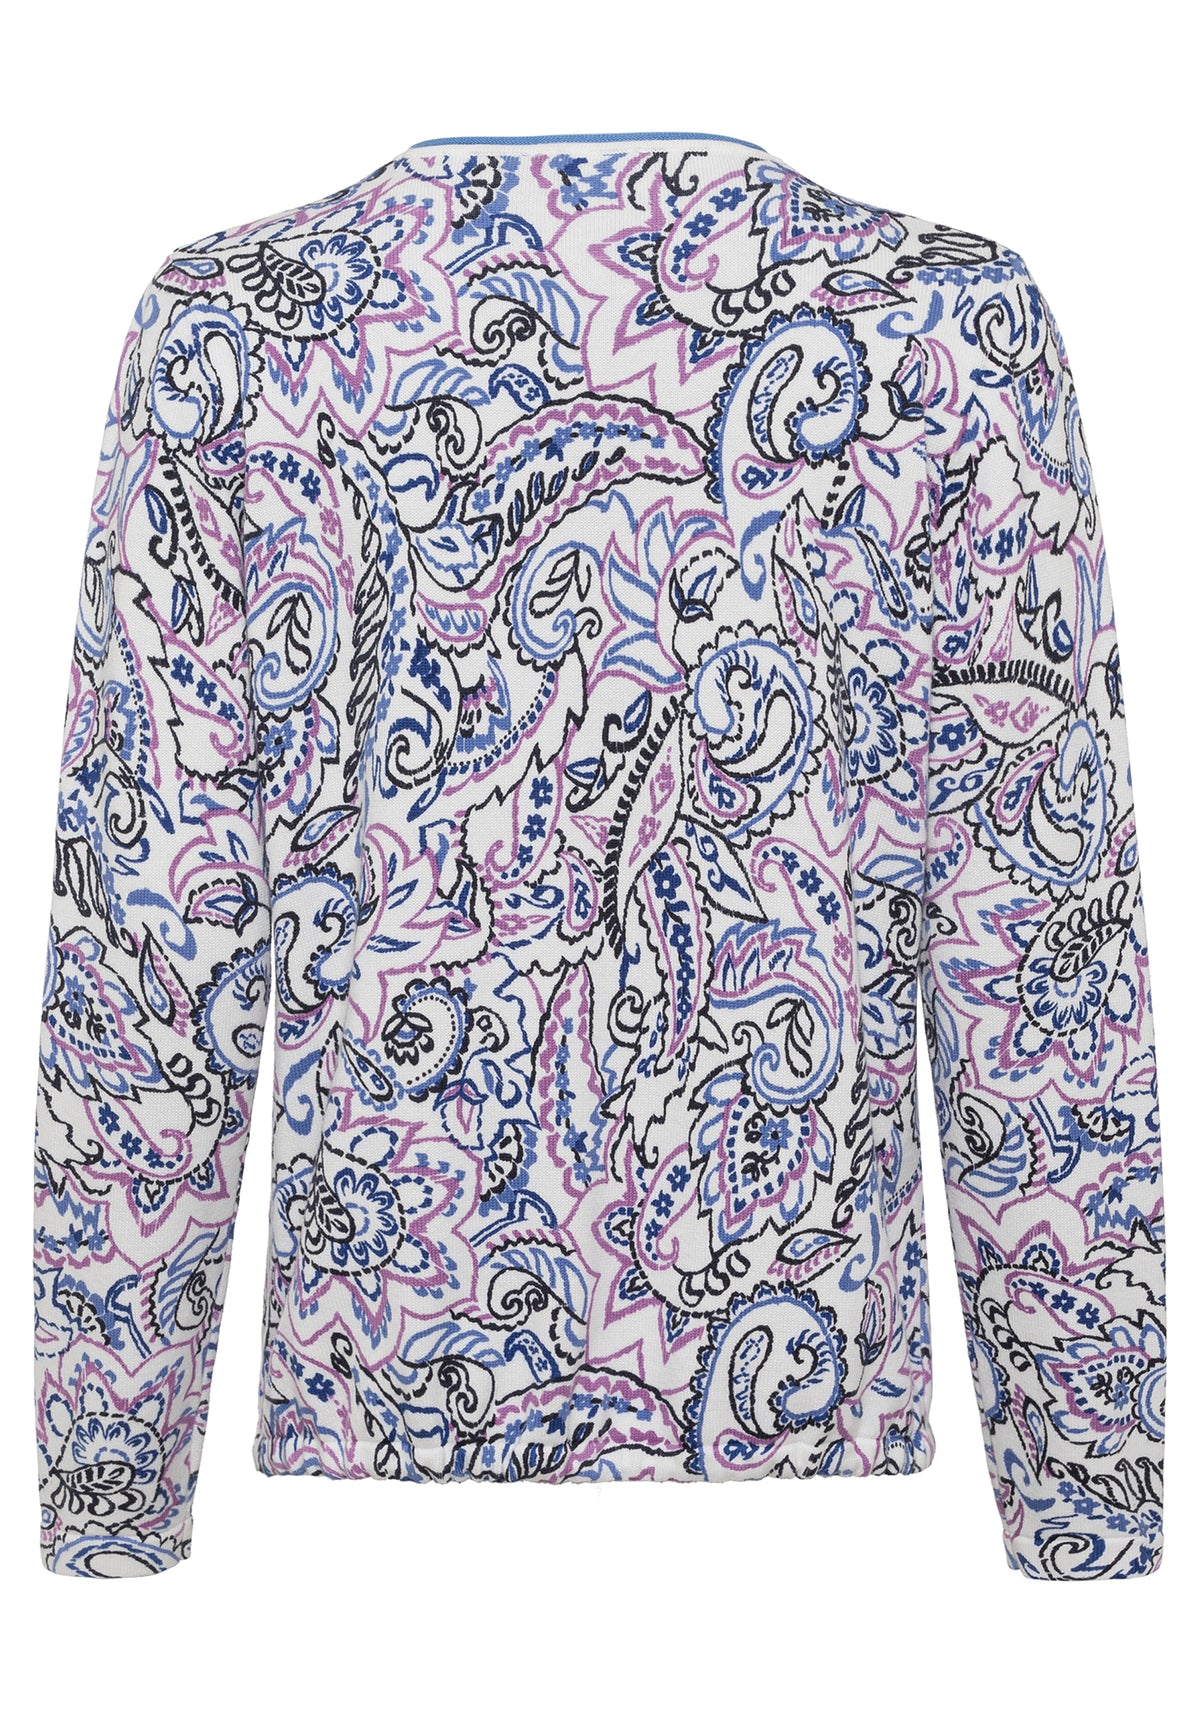 100% Cotton Long Sleeve Allover Paisley Motif Sweater